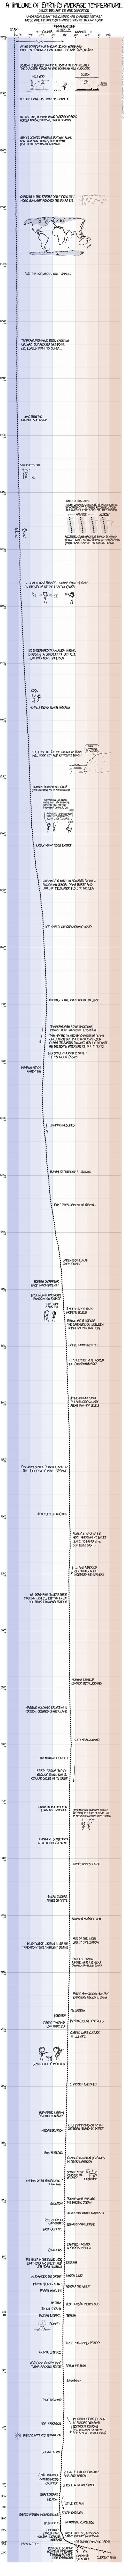 earth-temperature-timeline-xkcd